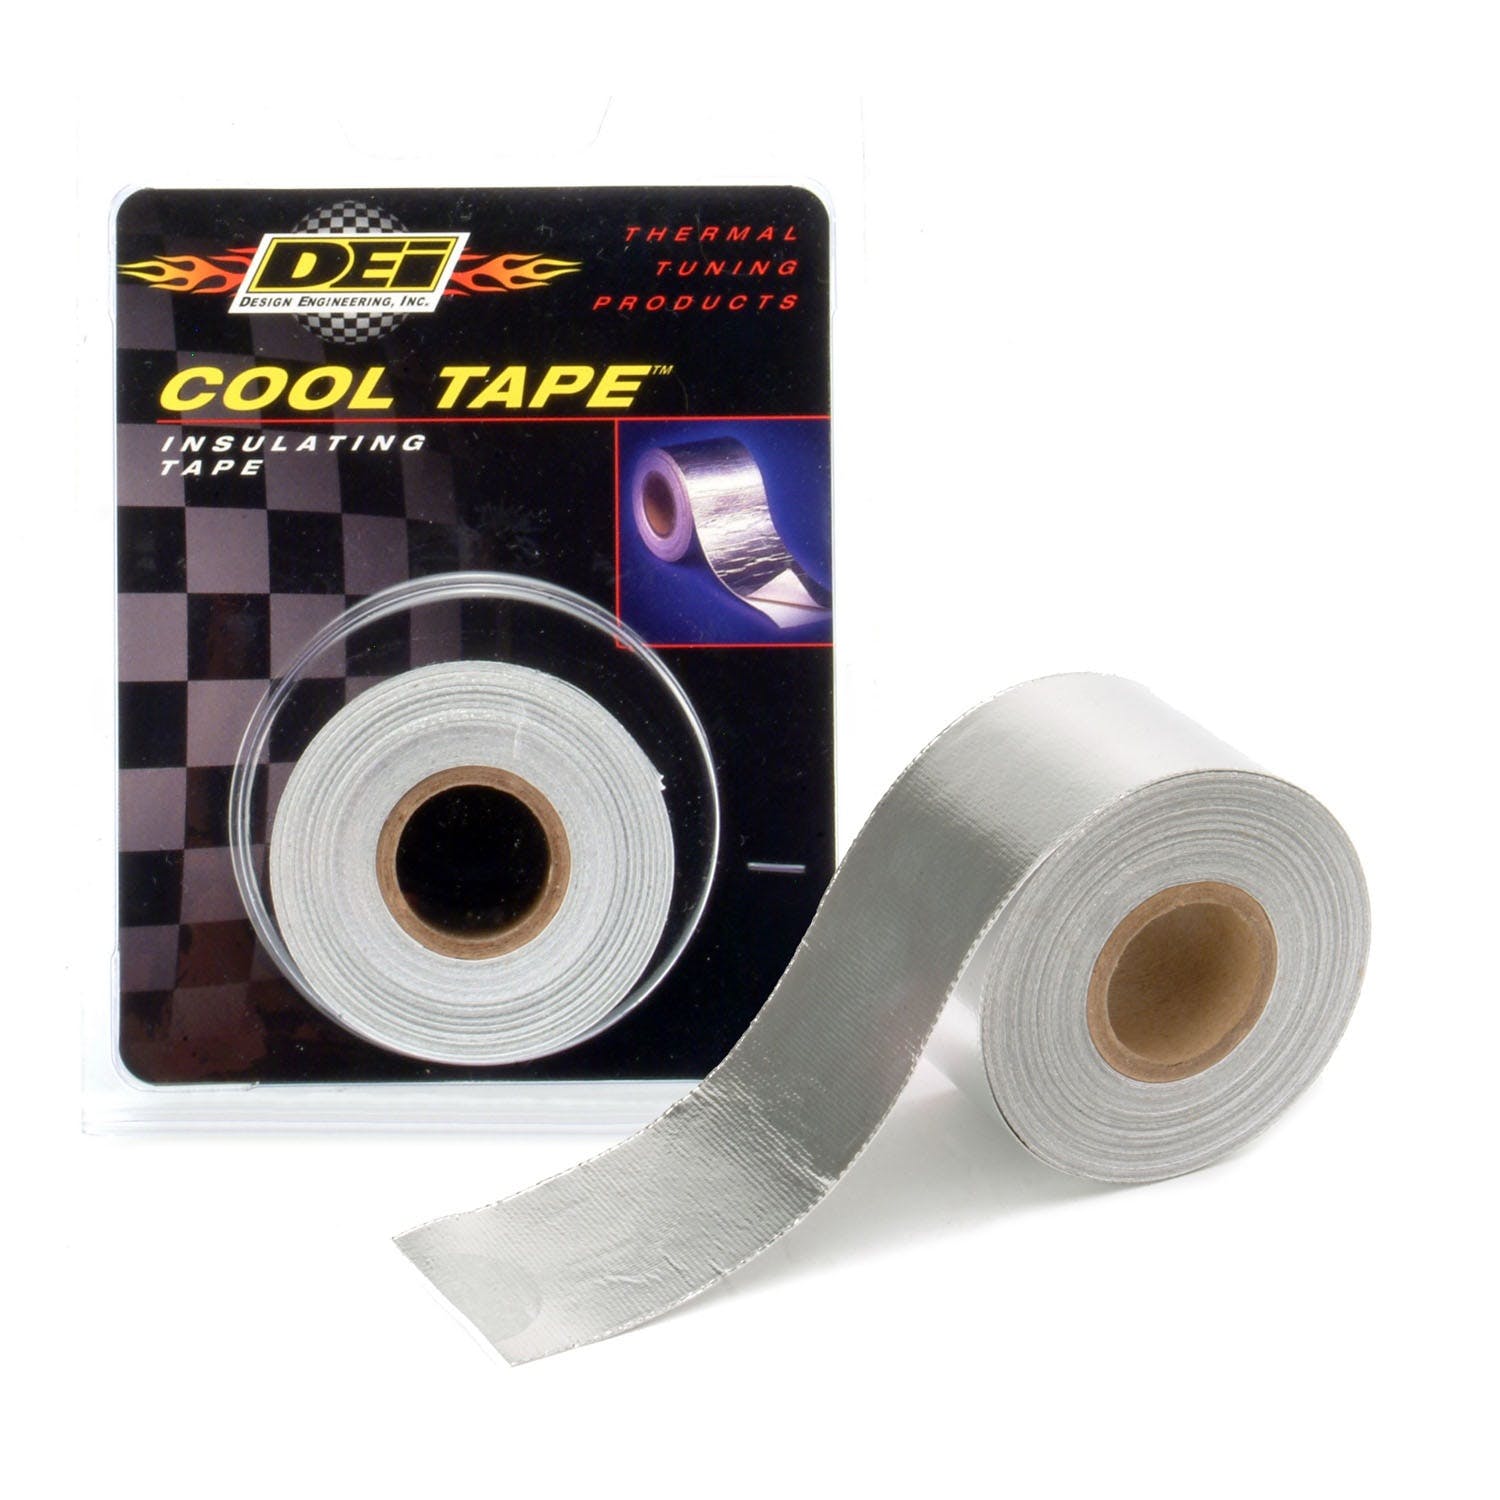 Design Engineering, Inc. 10408 Cool-Tape 1-1/2 x 15ft roll